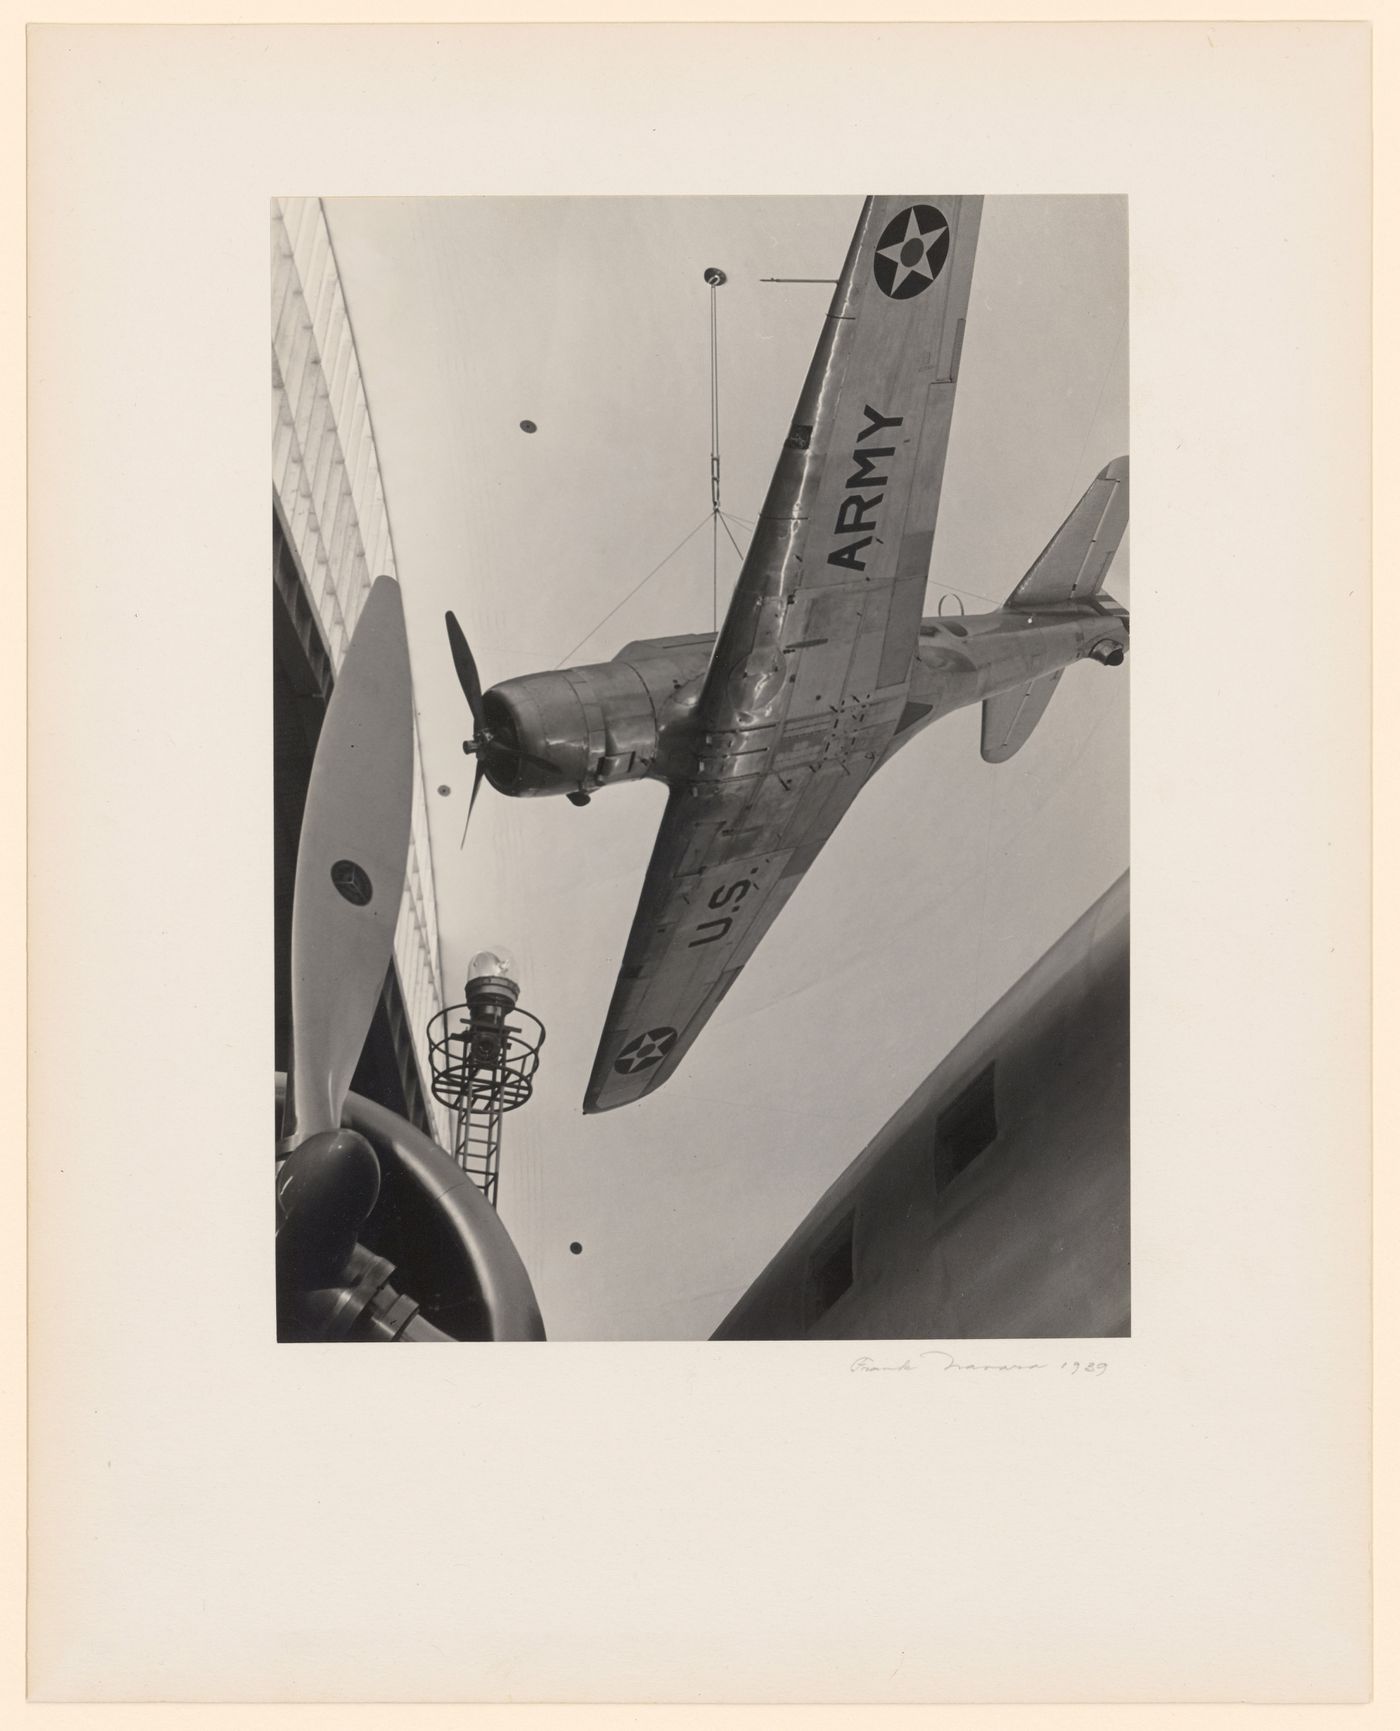 New York World's Fair (1939-1940): U.S. Army Planes on exhibit, one suspended from ceiling